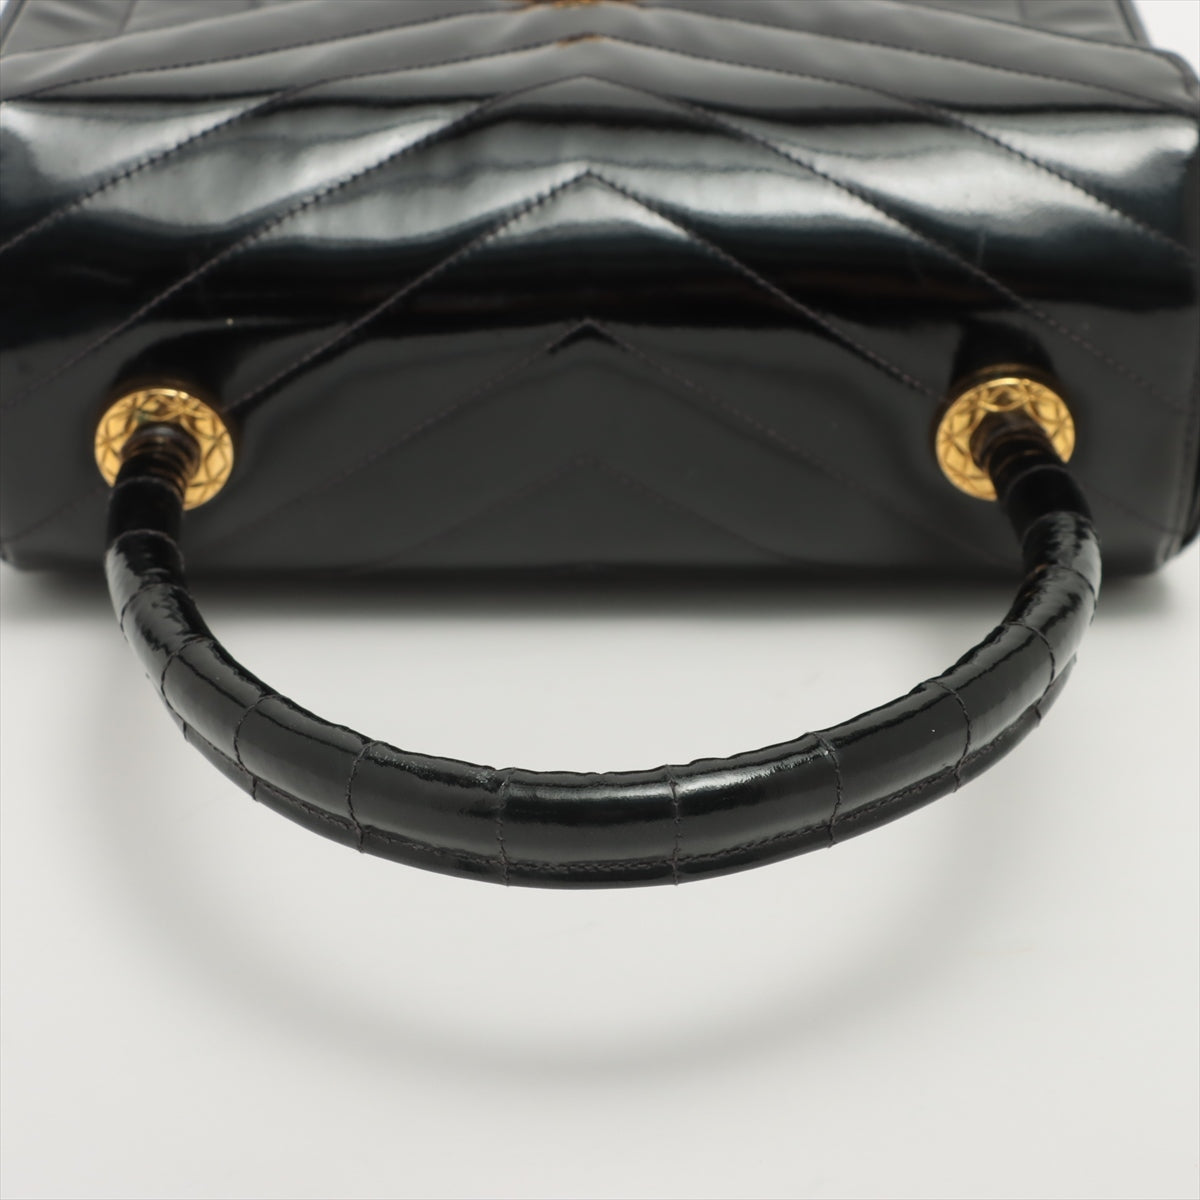 Chanel V Stitch Patent leather Hand bag Black Gold Metal fittings